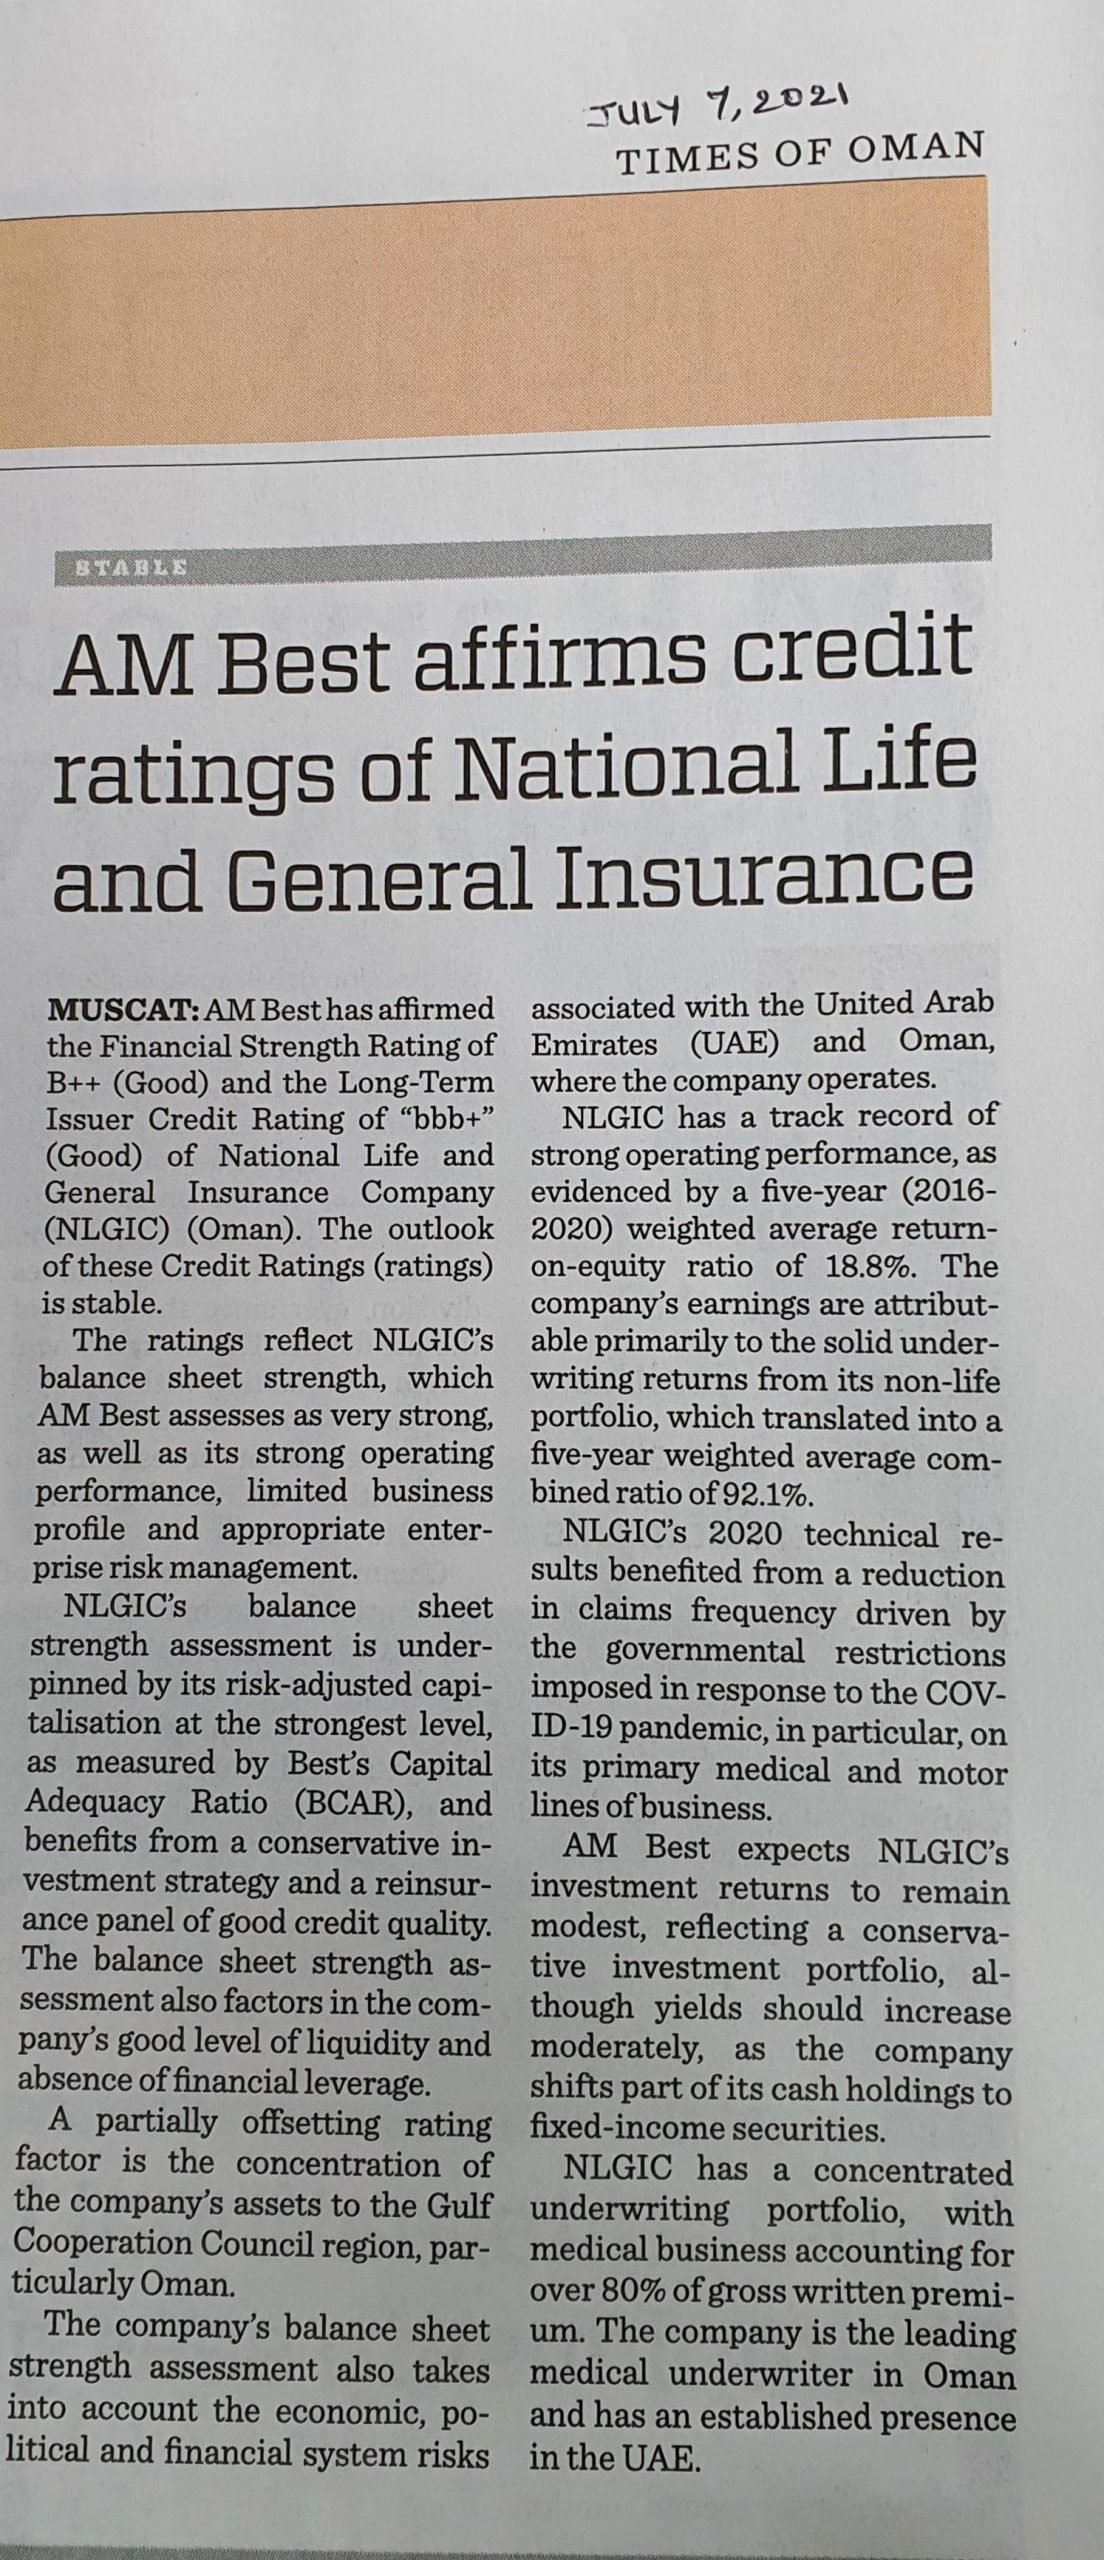 AM Best affirms credit ratings of National Life and General Insurance